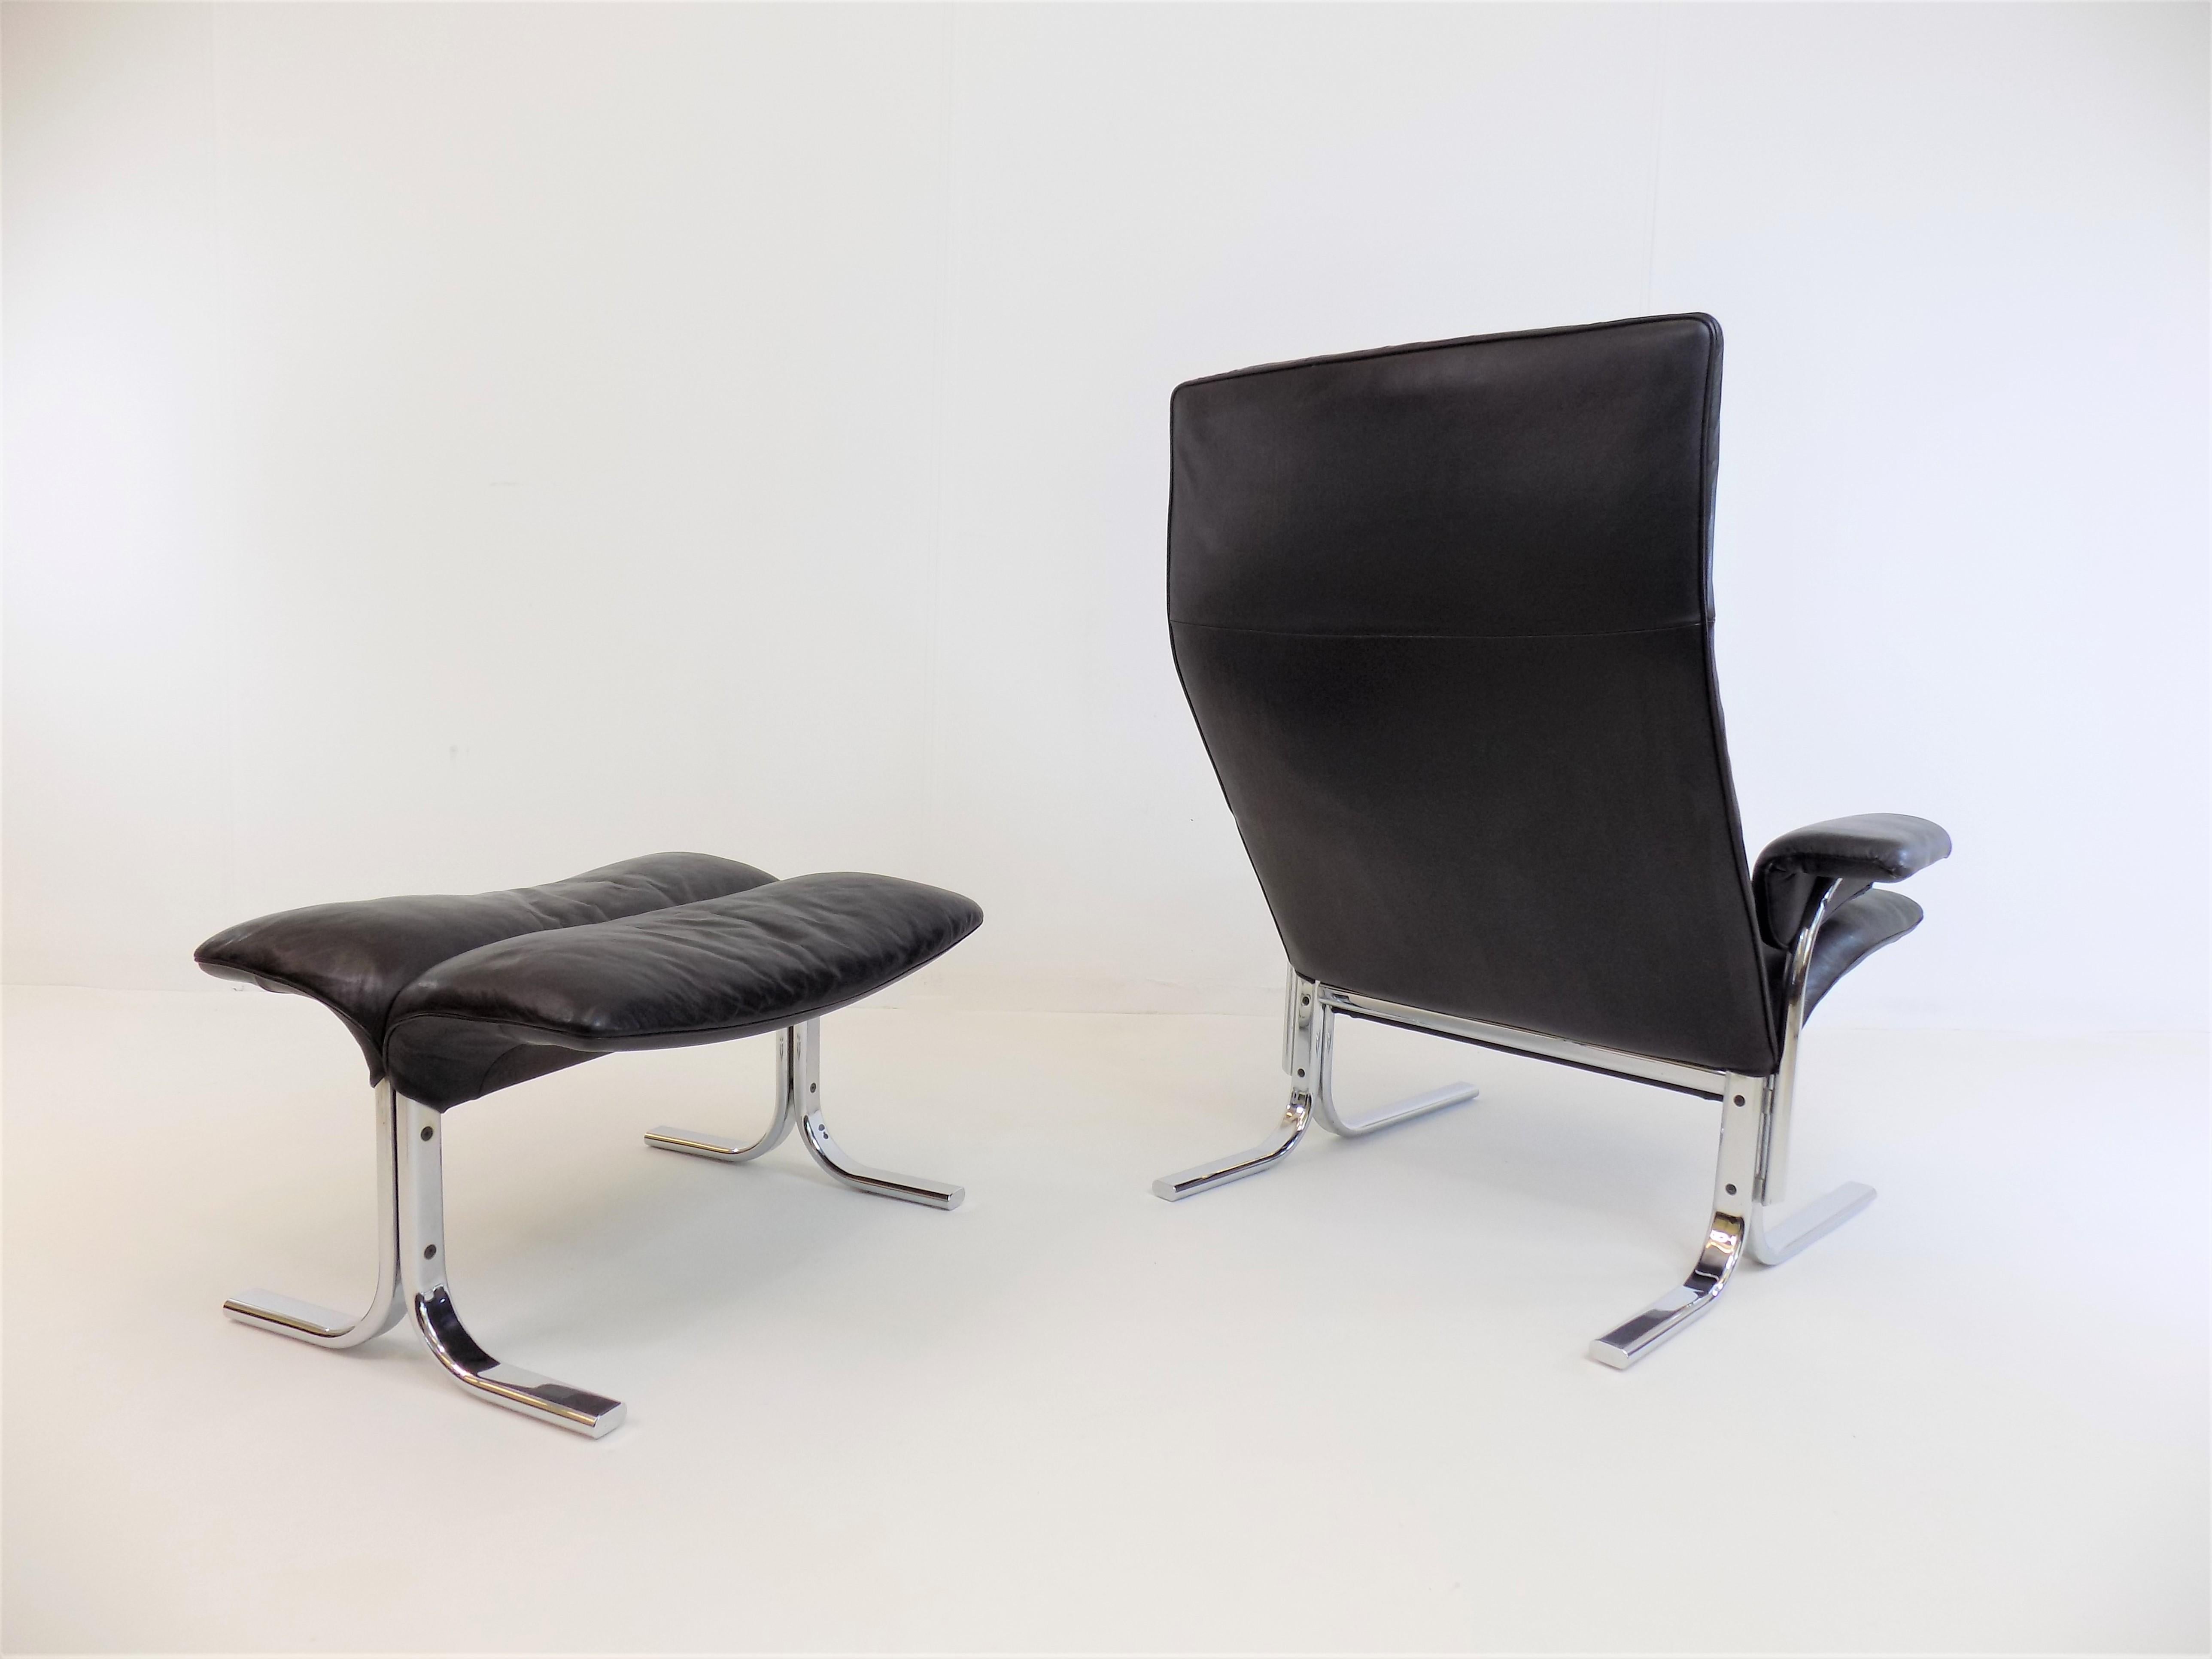 This DS 2030 in black leather with matching ottoman is in very good condition. The leather only shows slight signs of aging on the seat. The chrome frame of the armchair makes a new impression. The ottoman is in excellent condition in leather and